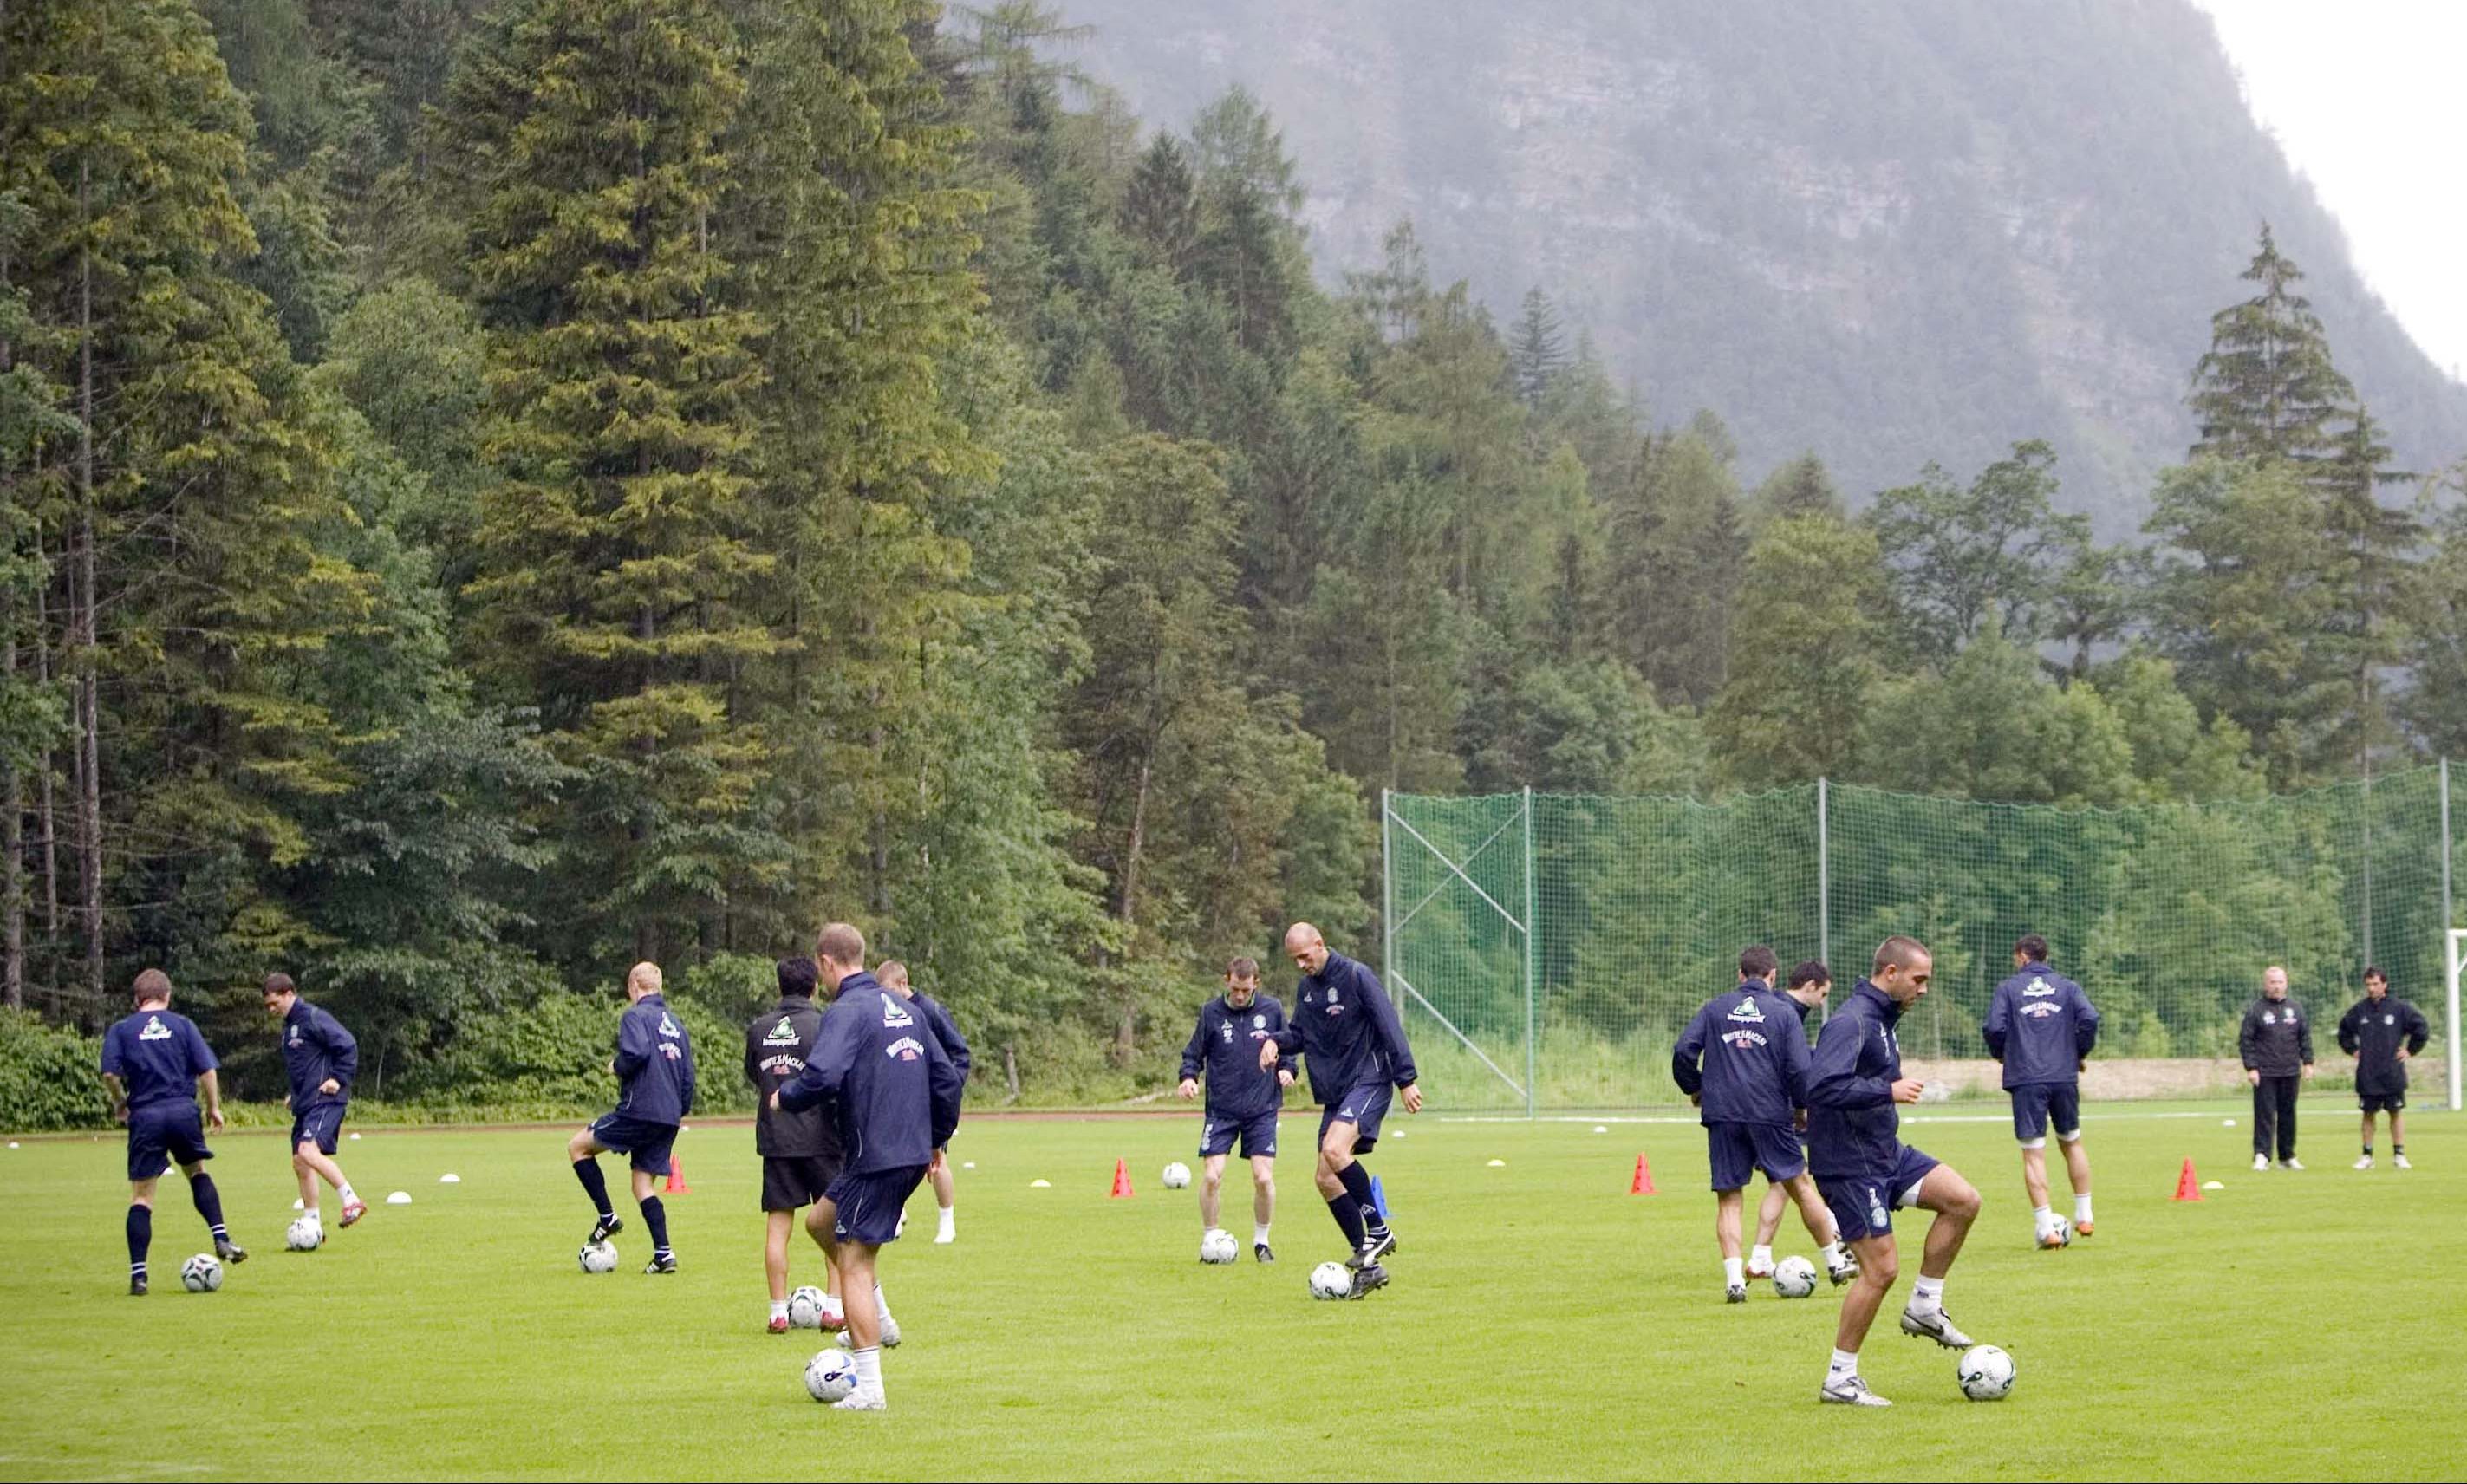 The Obertraun complex has become a popular pre-season base for Scottish sides.